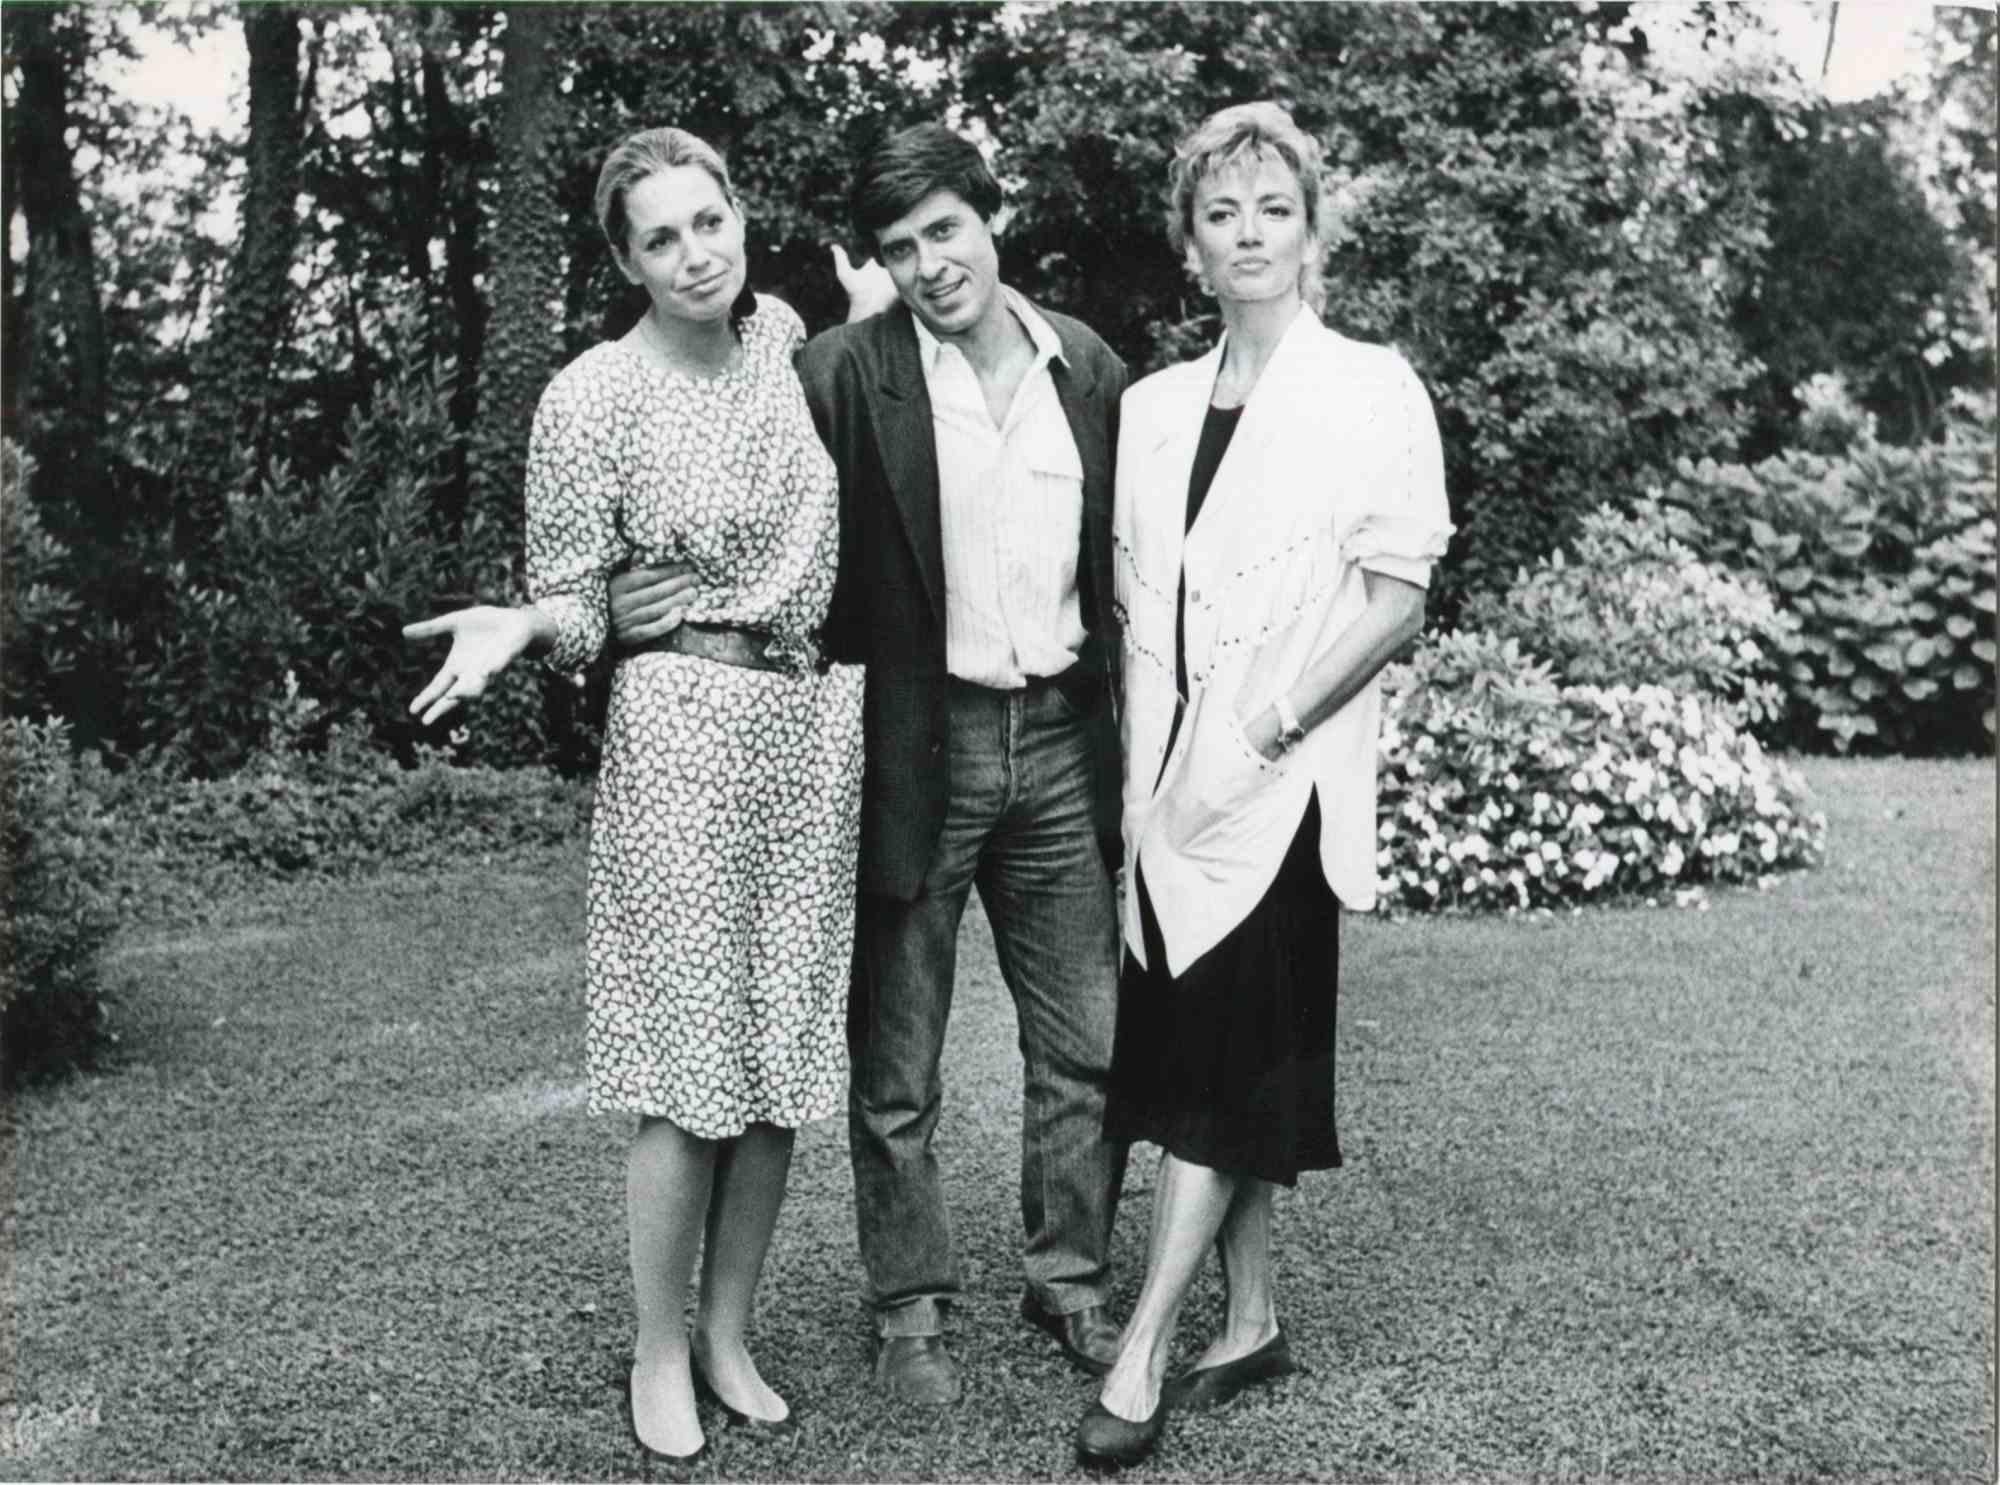 Unknown Figurative Photograph - Gianni Morandi, Catherine Stark and Milly Carlucci - Vintage Photo - 1980s